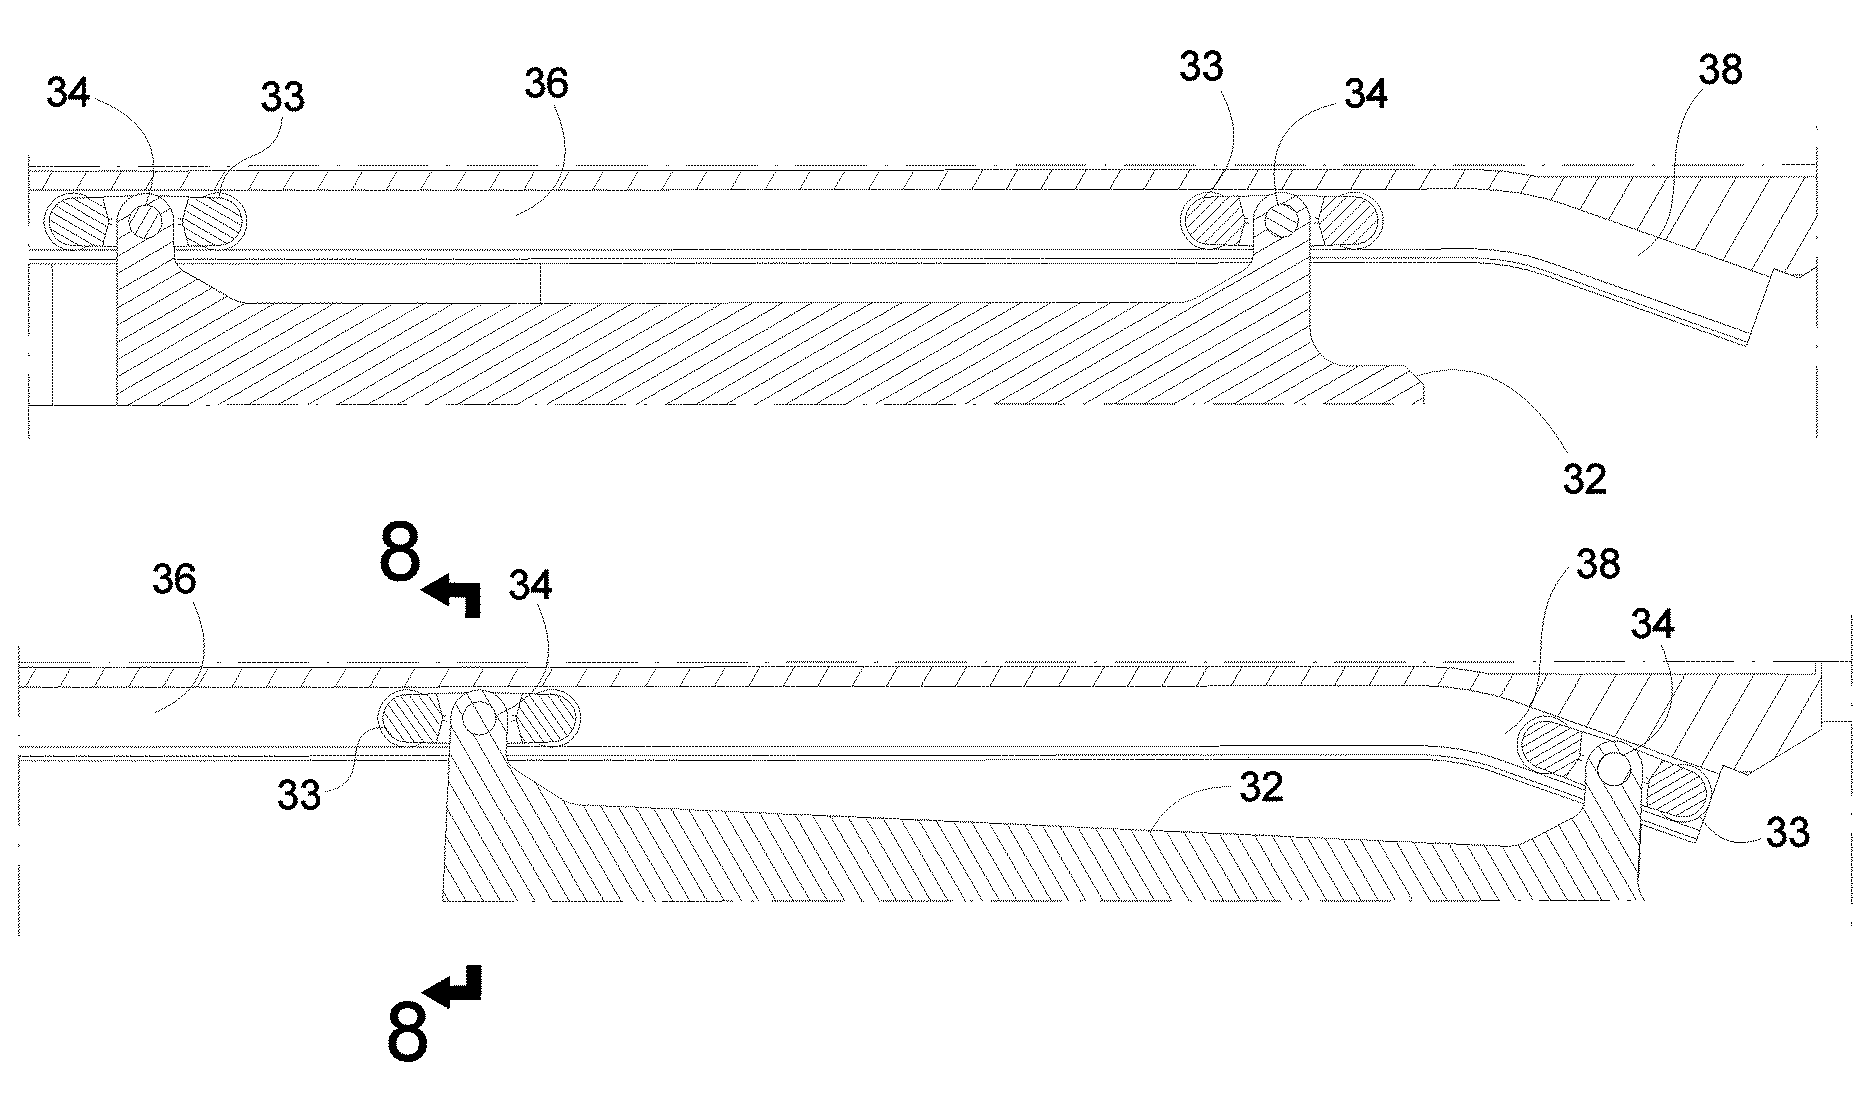 Axially translating and radially tilting fan nozzle segments with combined actuation and position sensing